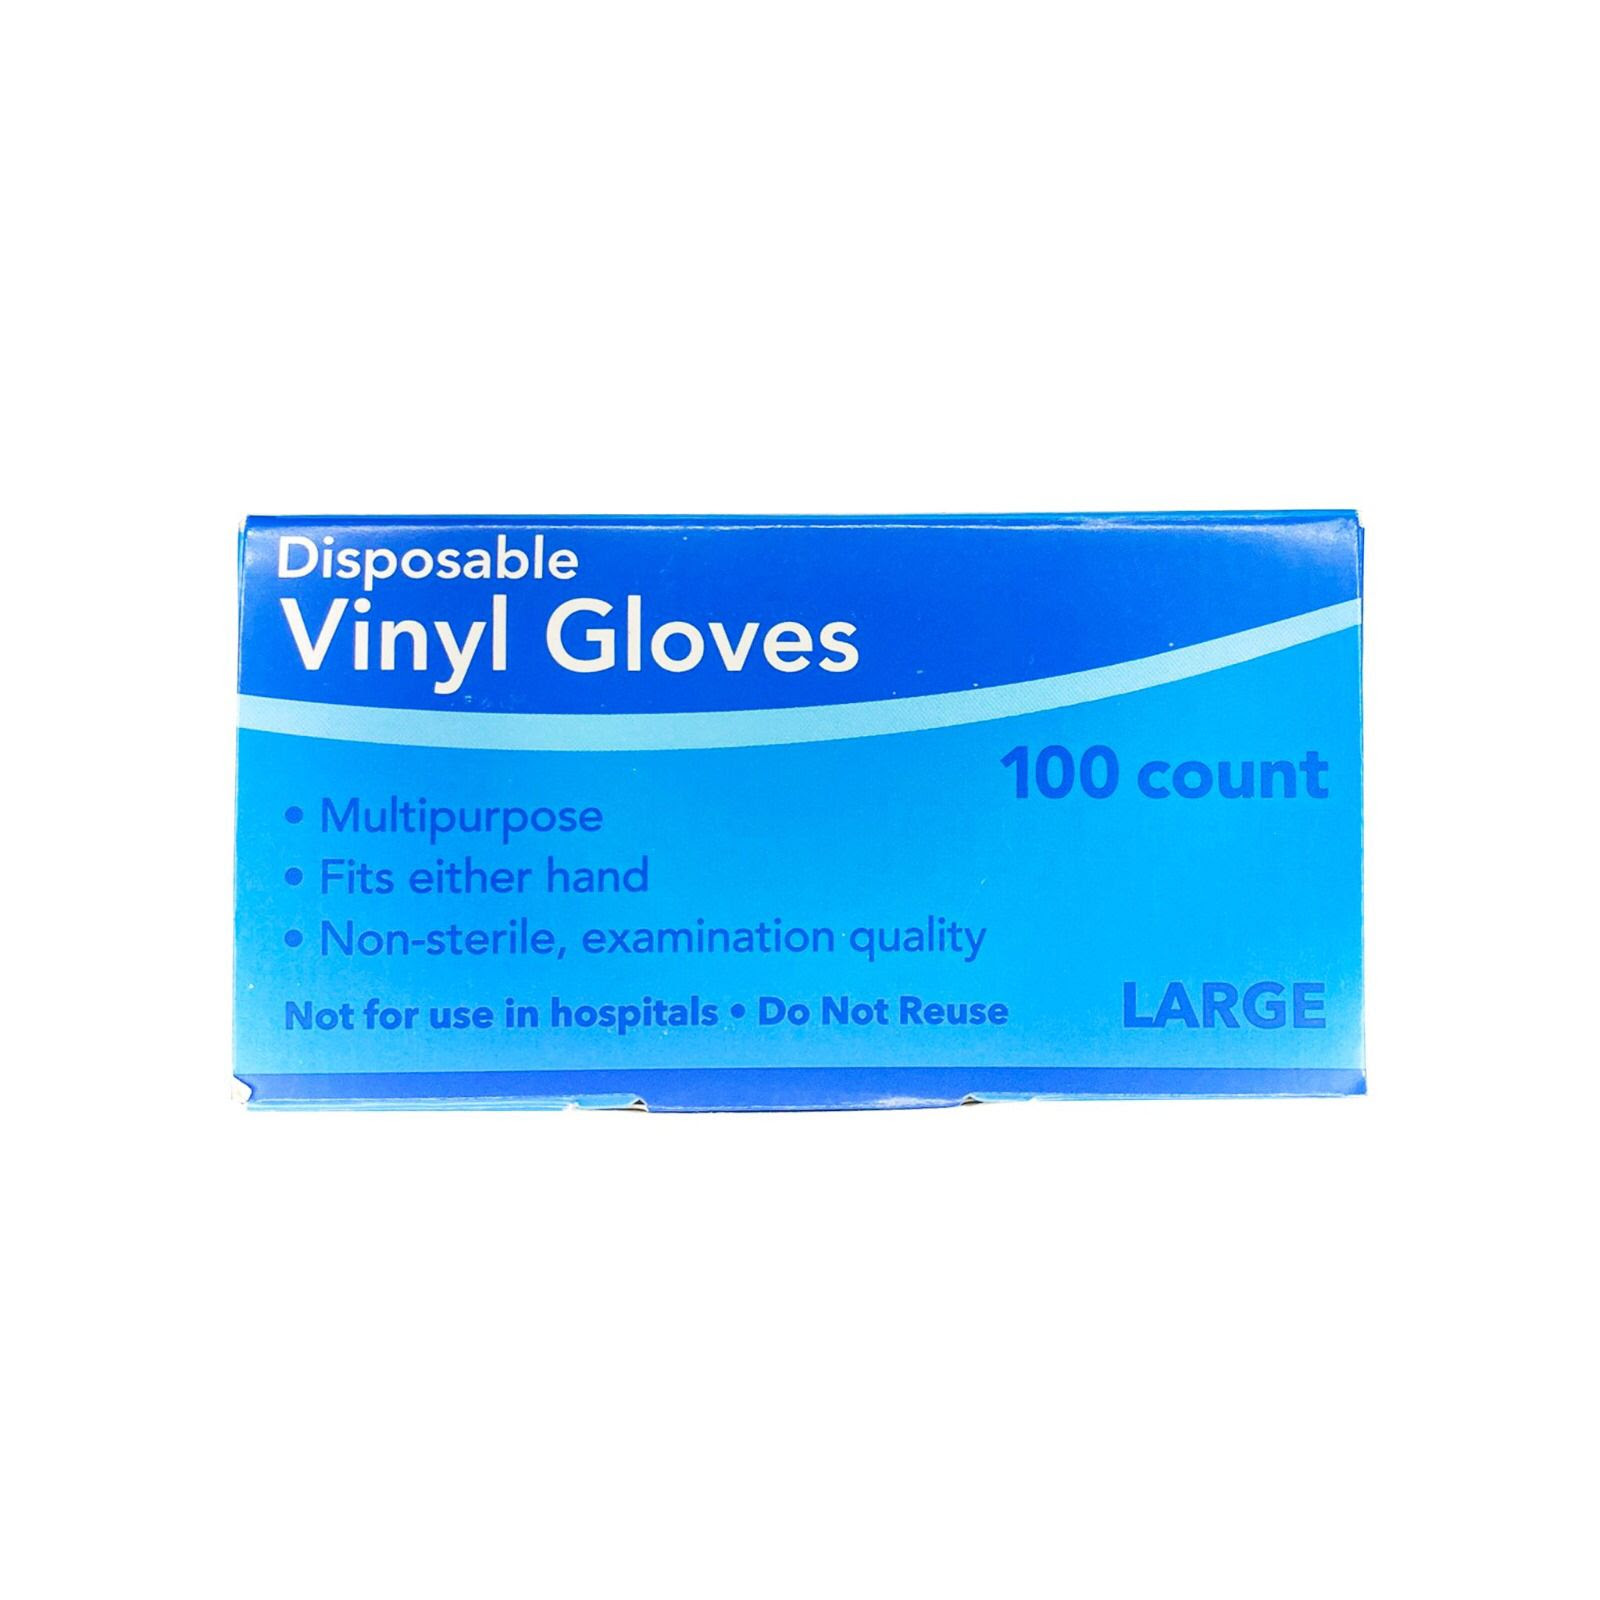 POWDER FREE DISPOSABLE VINYL GLOVE. 200K BOXES. EXW LOS ANGELES BOX OF 100. SIZE LARGE ONLY